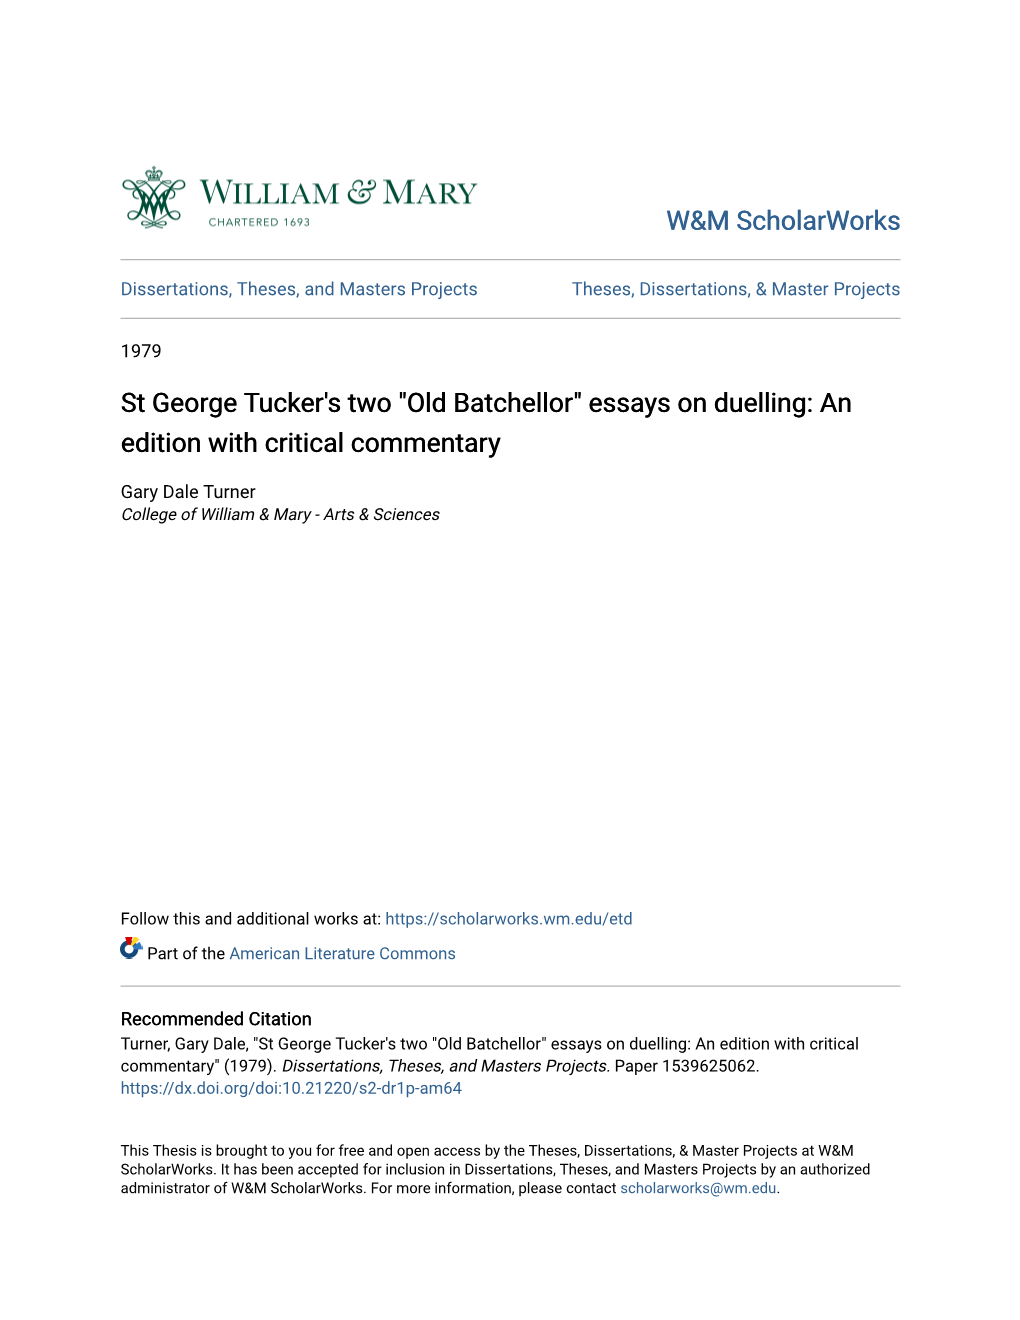 St George Tucker's Two "Old Batchellor" Essays on Duelling: an Edition with Critical Commentary